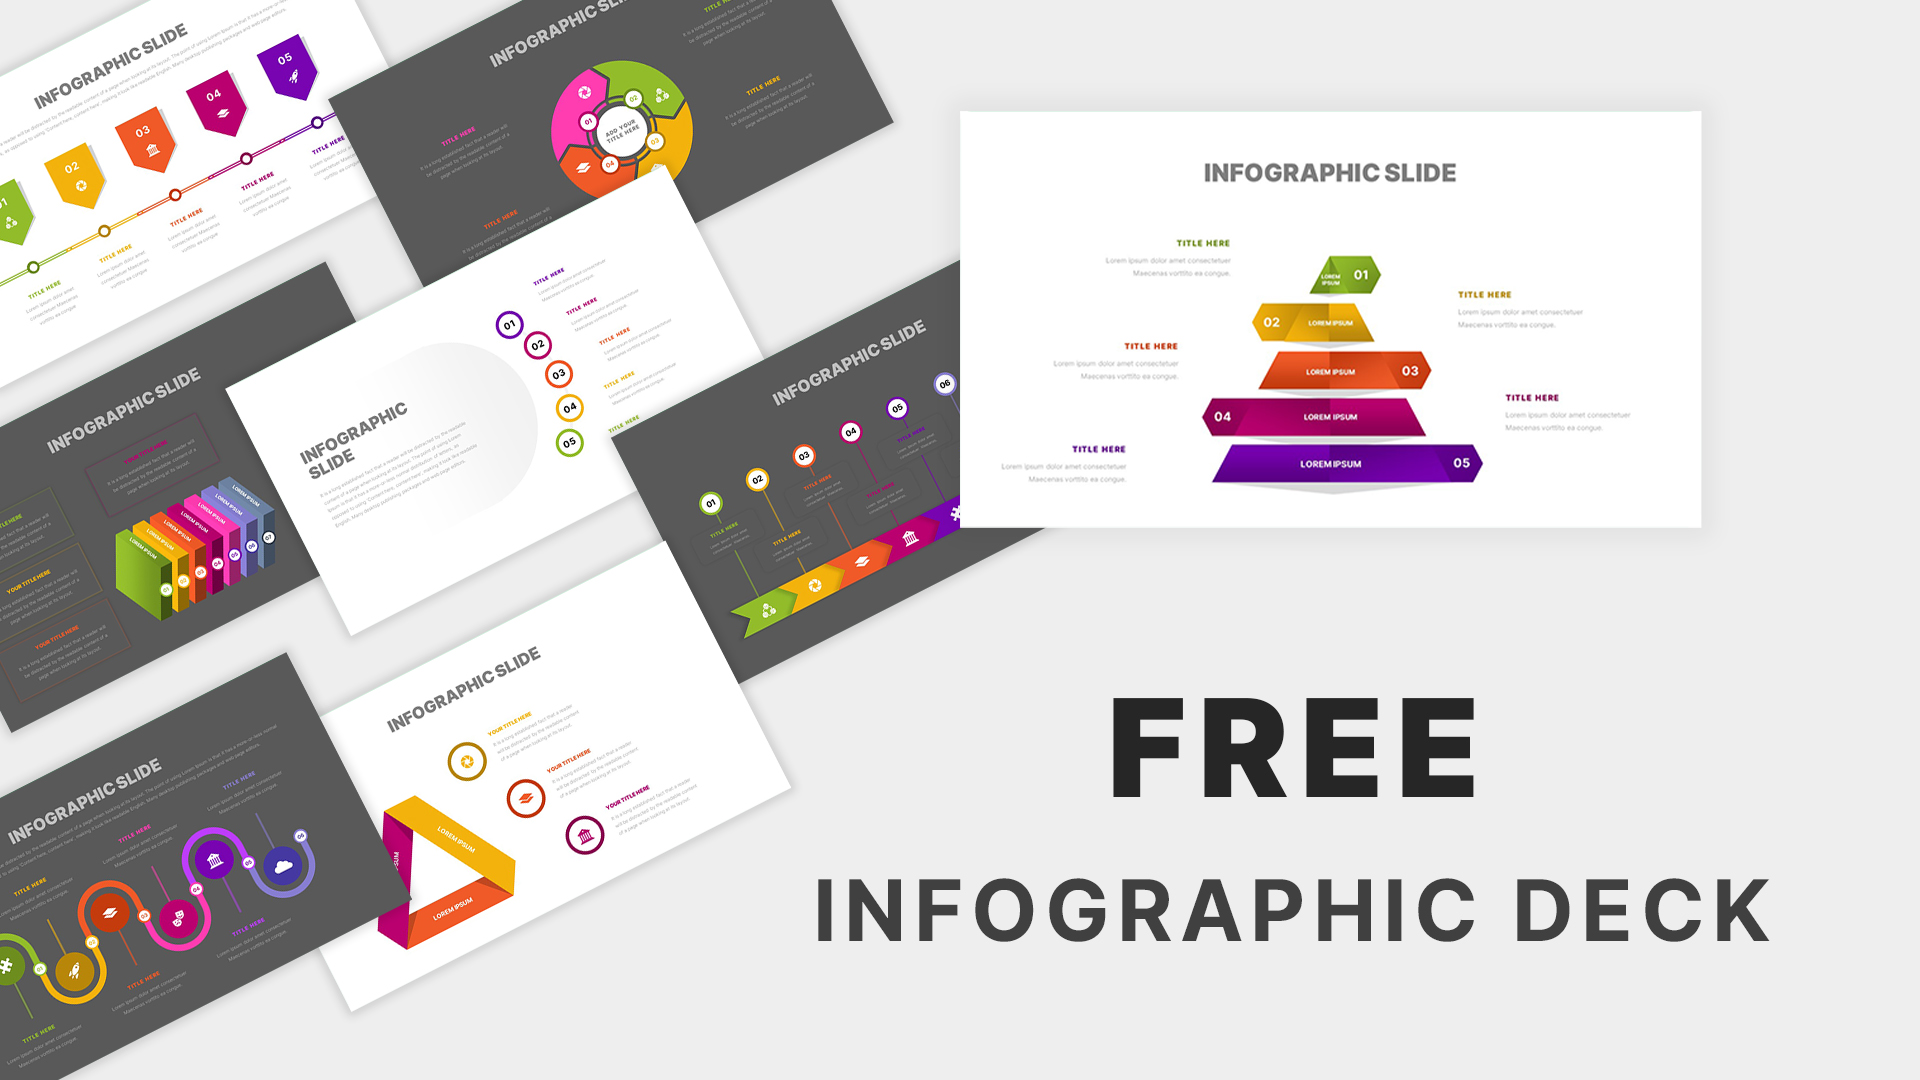 Free Infographic Deck Presentation Template